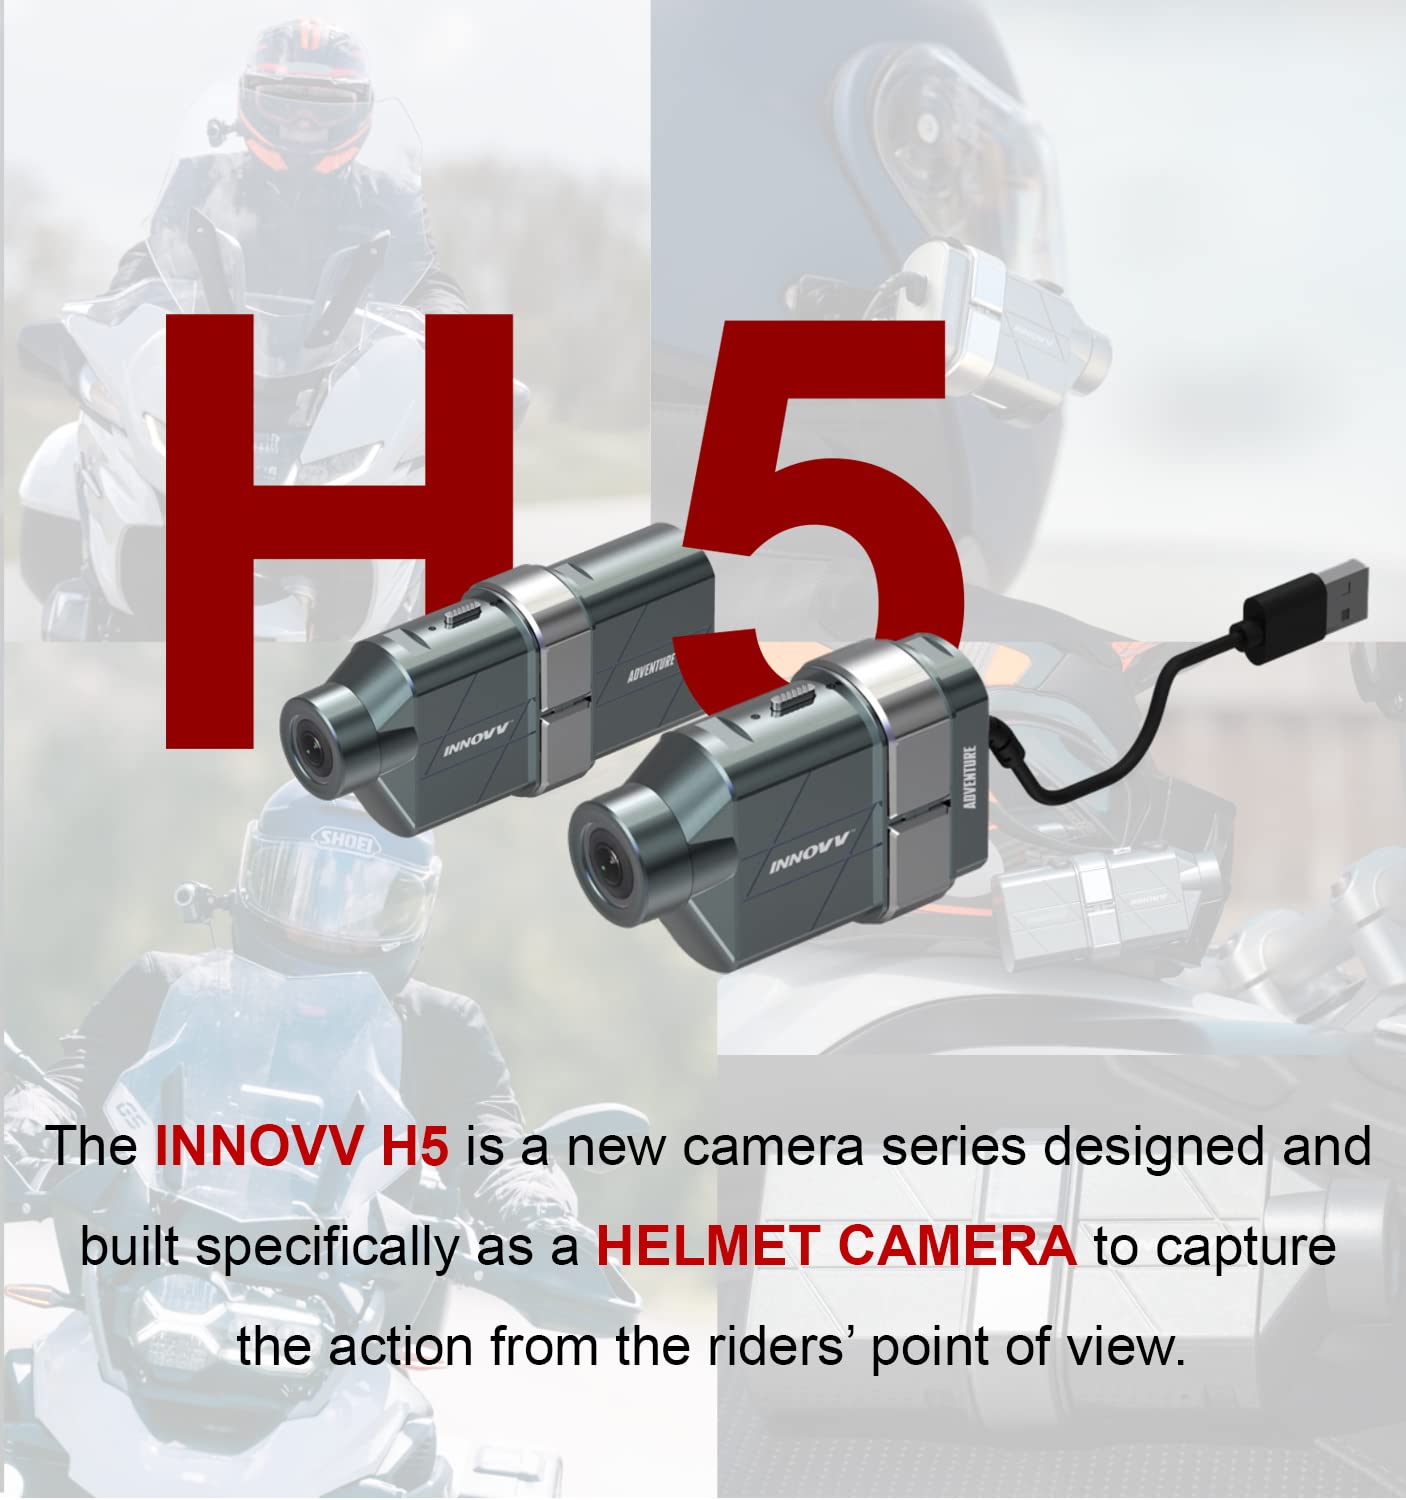 INNOVV H5 Motorcycle Helmet Camera 4K 30fps with Wi-Fi, Electronic Image Stabilization Technology, Rechargeable Battery, Power Interface for Direct Power Connection, and IP65 Water Resistant